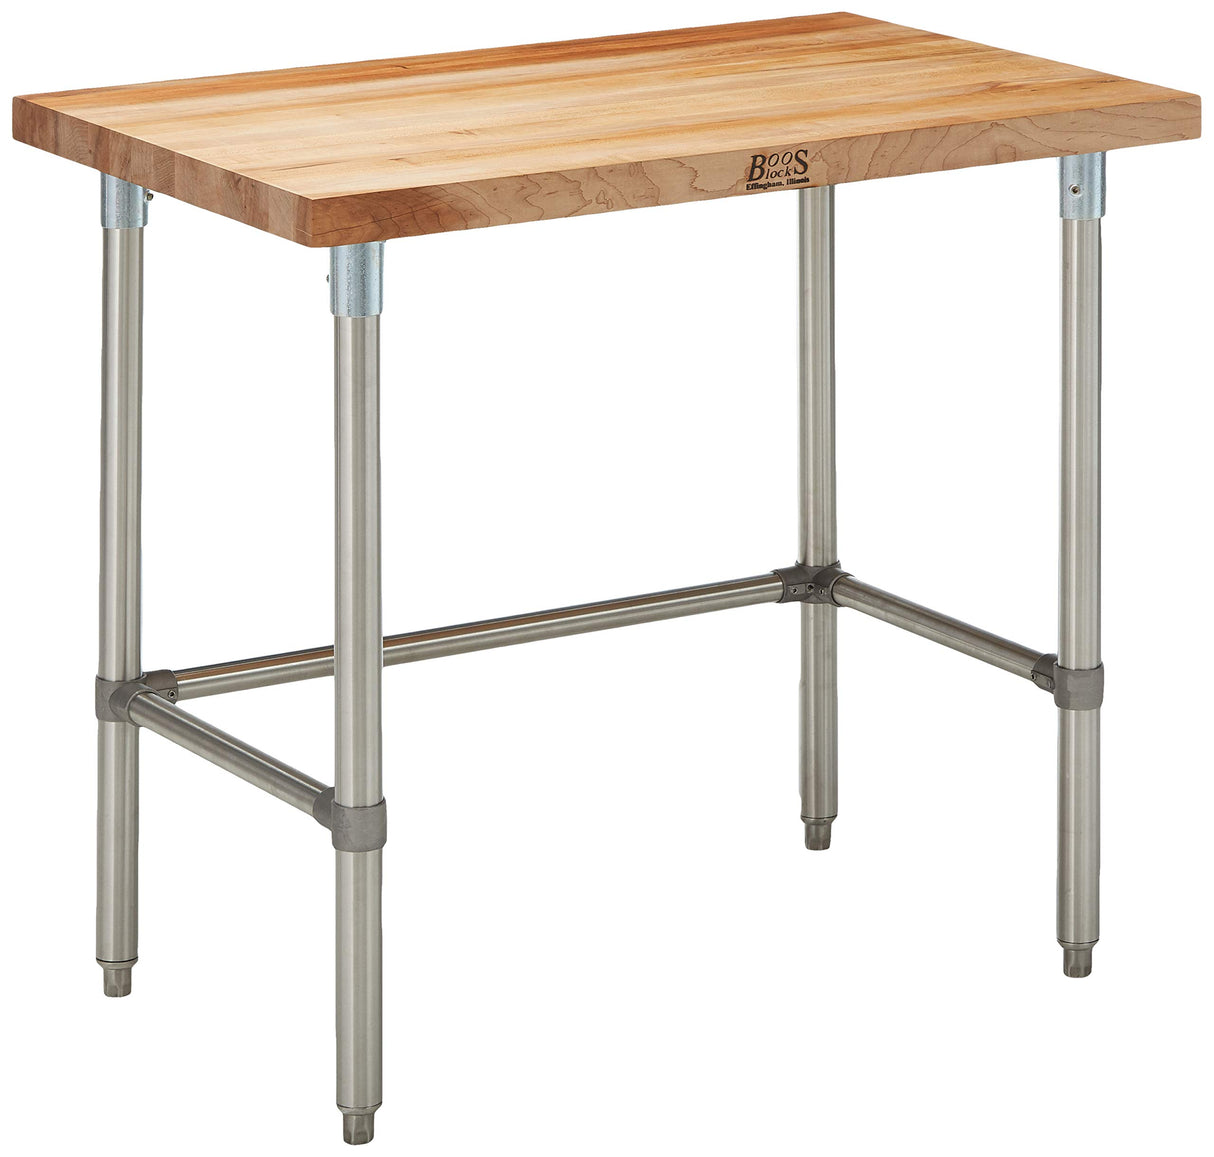 John Boos SNB08 Maple Top Work Table with Stainless Steel Base and Bracing, 48" Long x 30" Wide 1-3/4" Thick